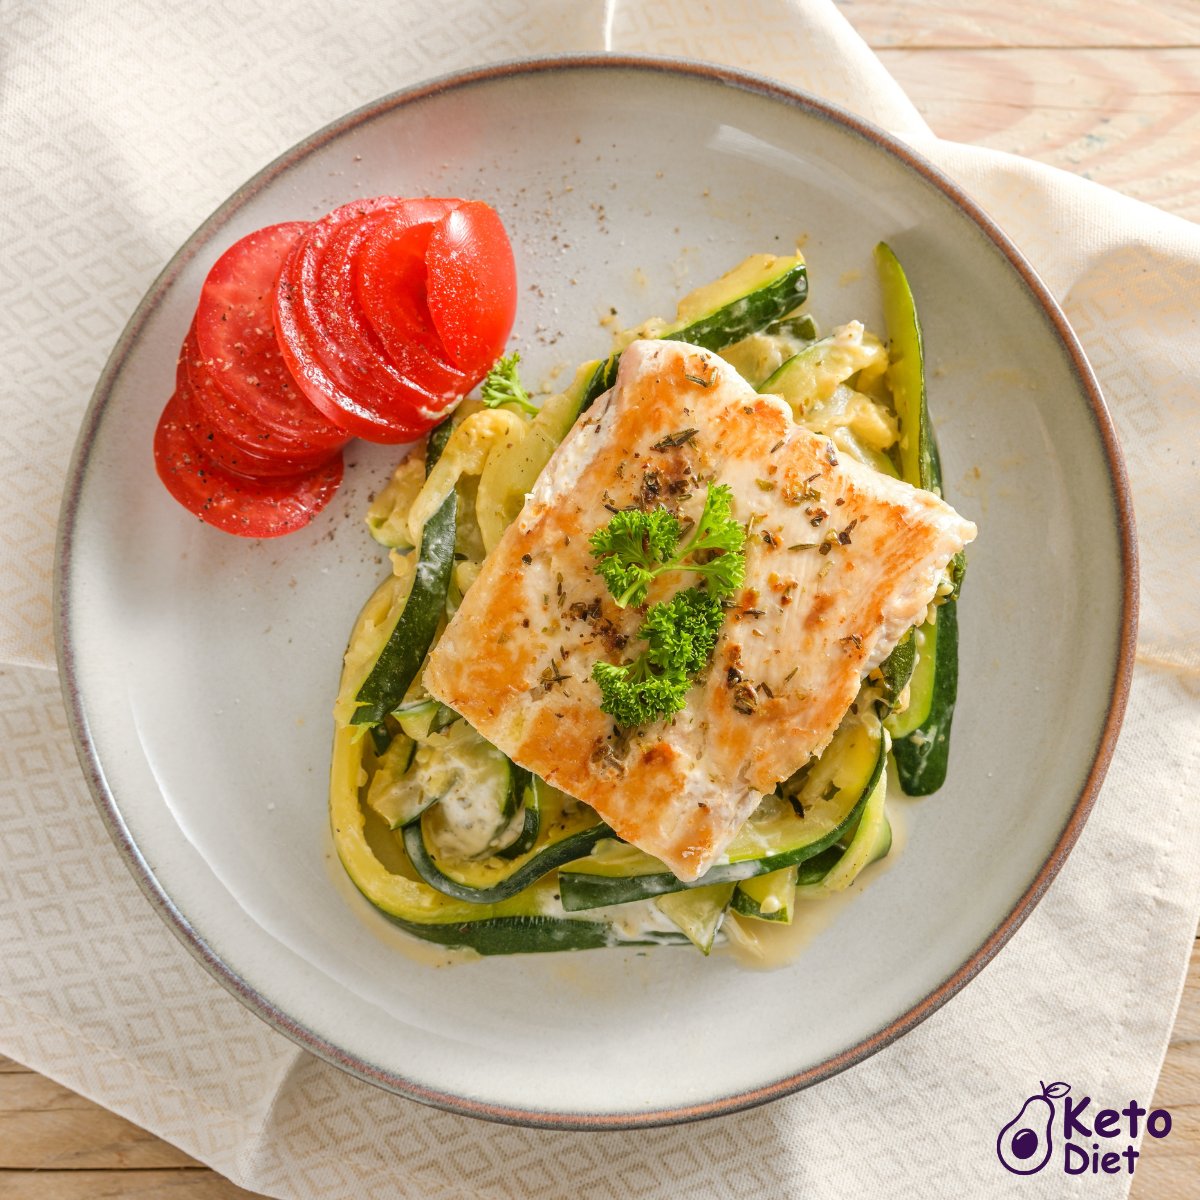 Here are some delicious Keto meal ideas. Let us know which one you prefer the most! 😍⁠⠀⁠ 𝟭. Grilled Chicken Salad.⁠ 𝟮. Halibut with Lemony Zucchini Noodles.⁠